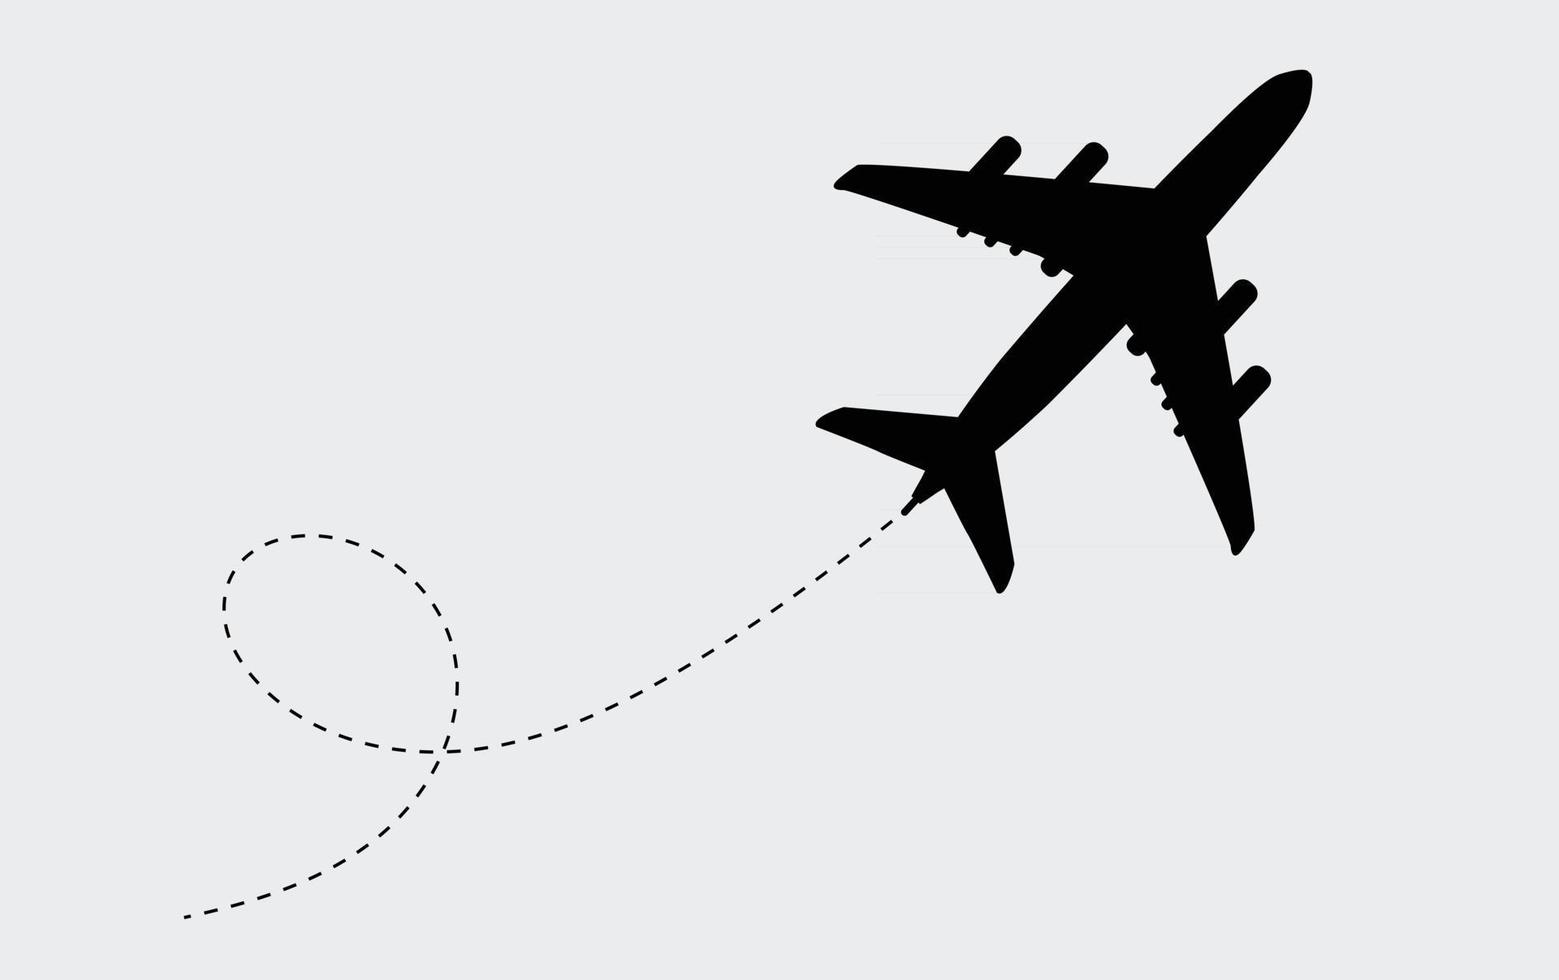 Flying Airplane Silhouette vector design